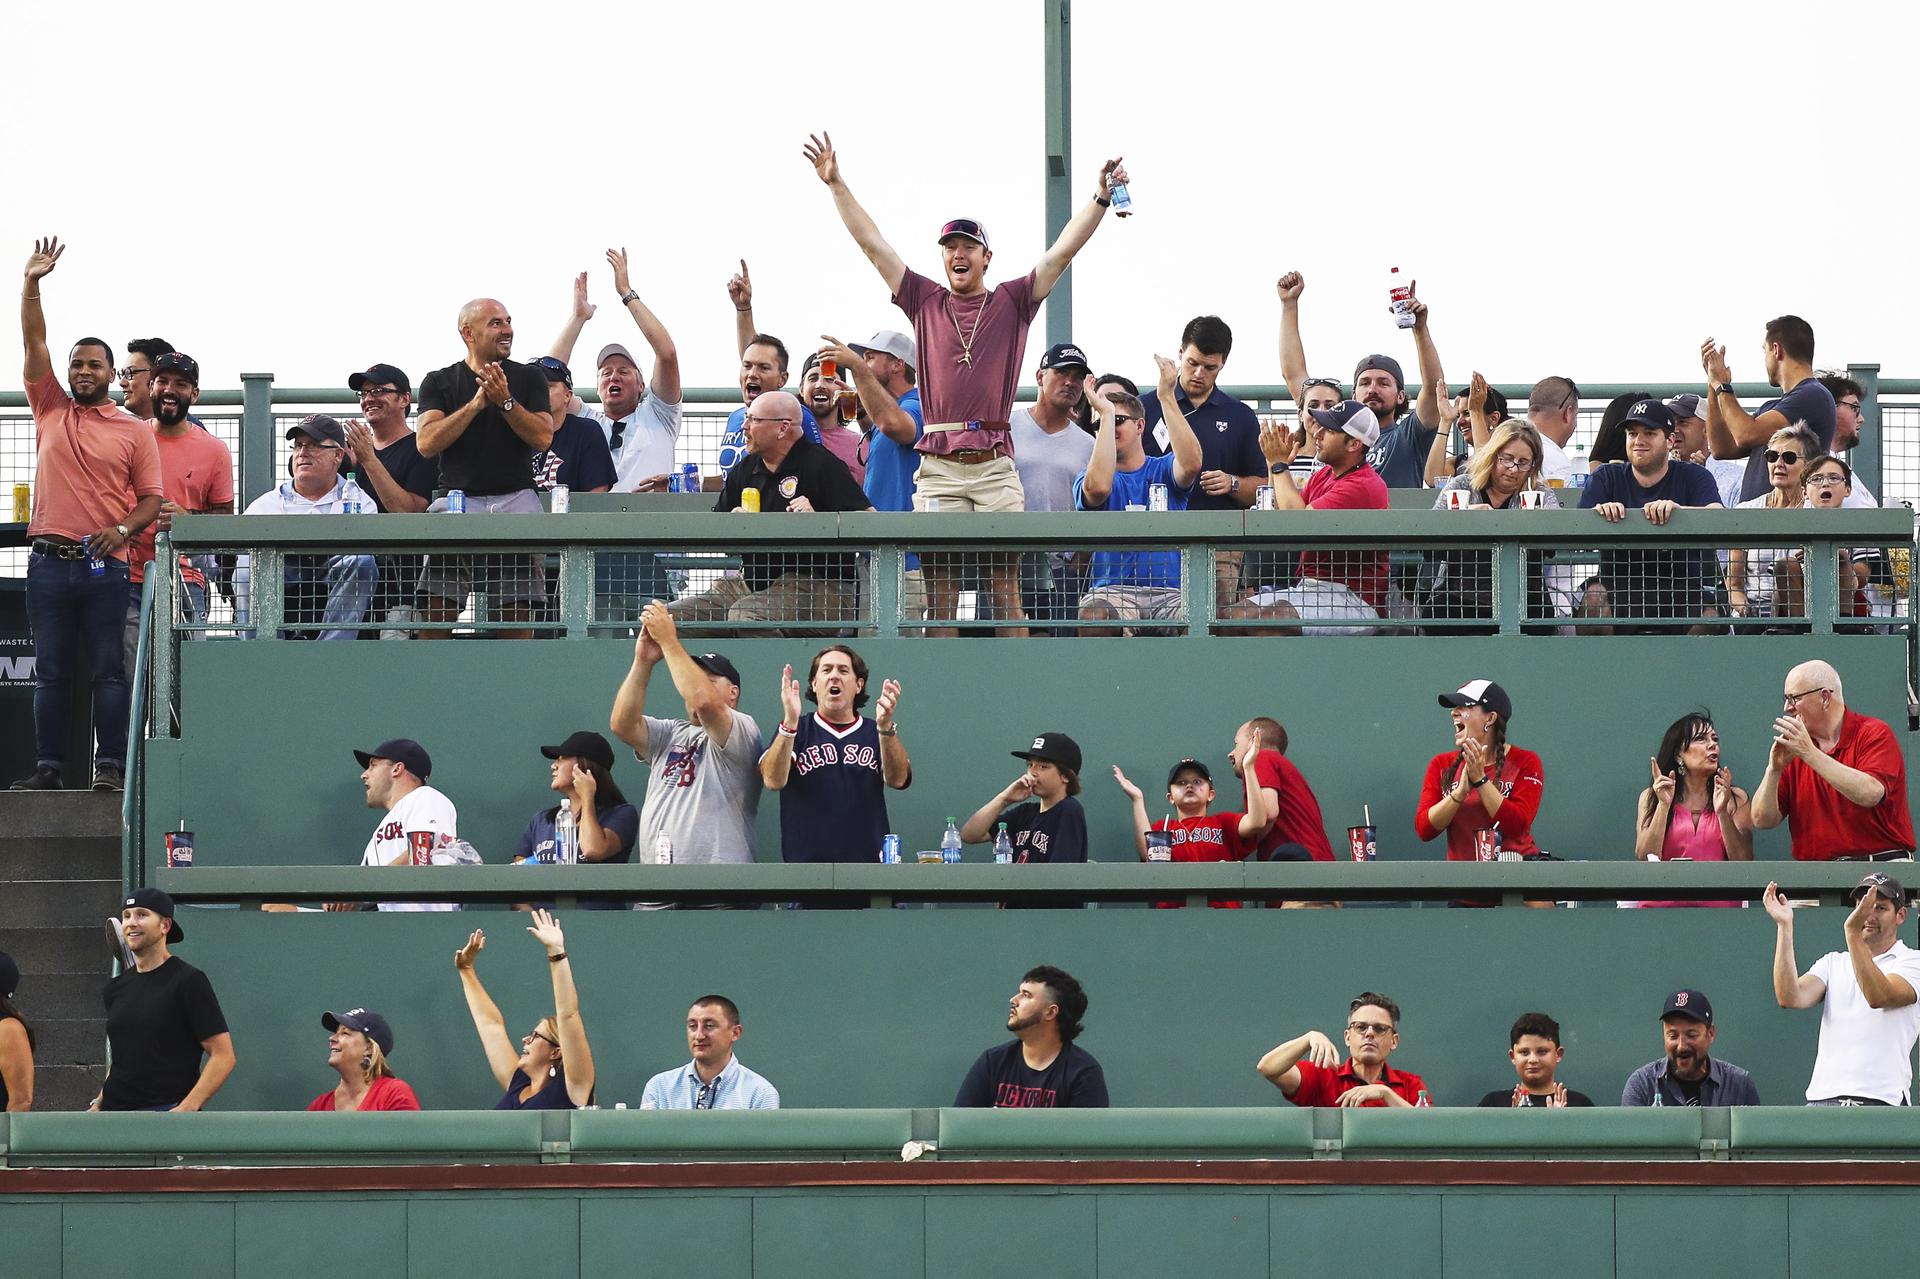 Sam Kennedy: Red Sox not expecting anything close to a sellout this weekend